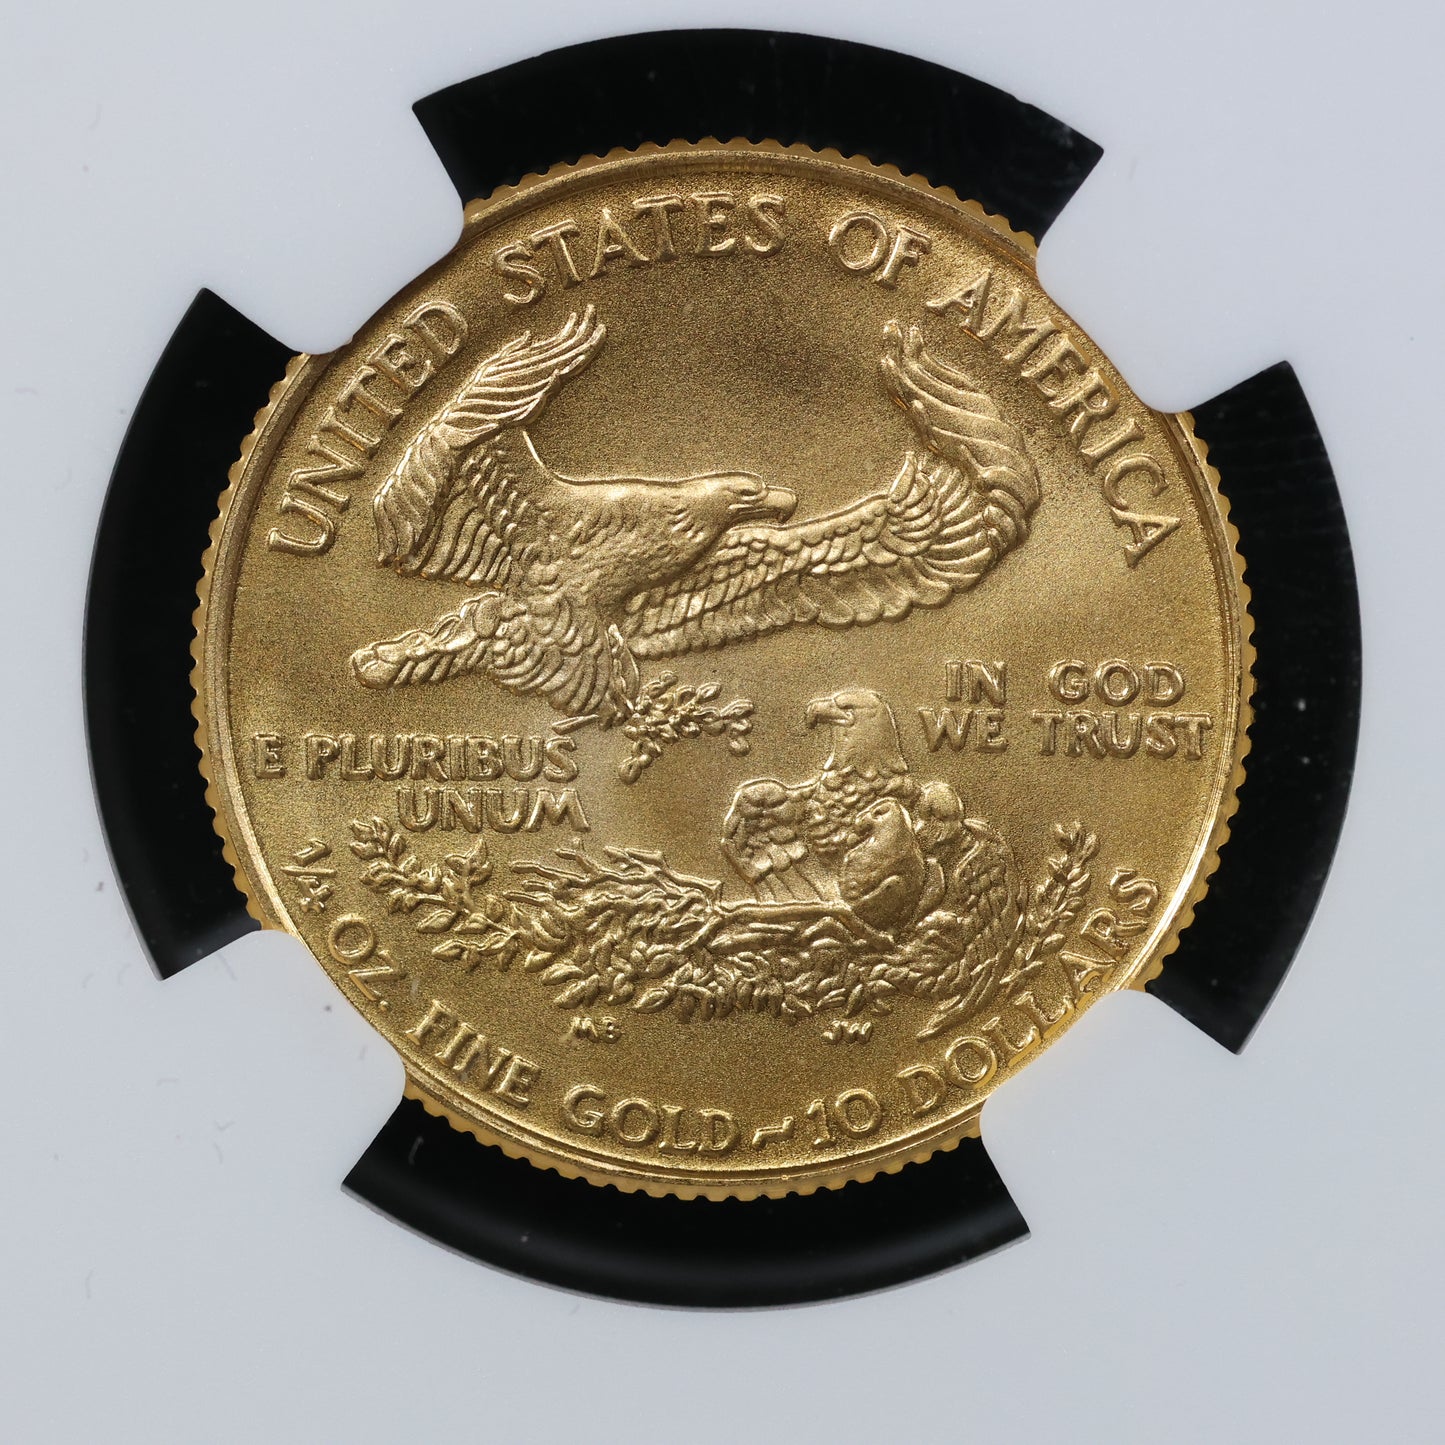 1992 1/4 oz Gold American Eagle 10$ Bullion Gold Coin - NGC MS 69